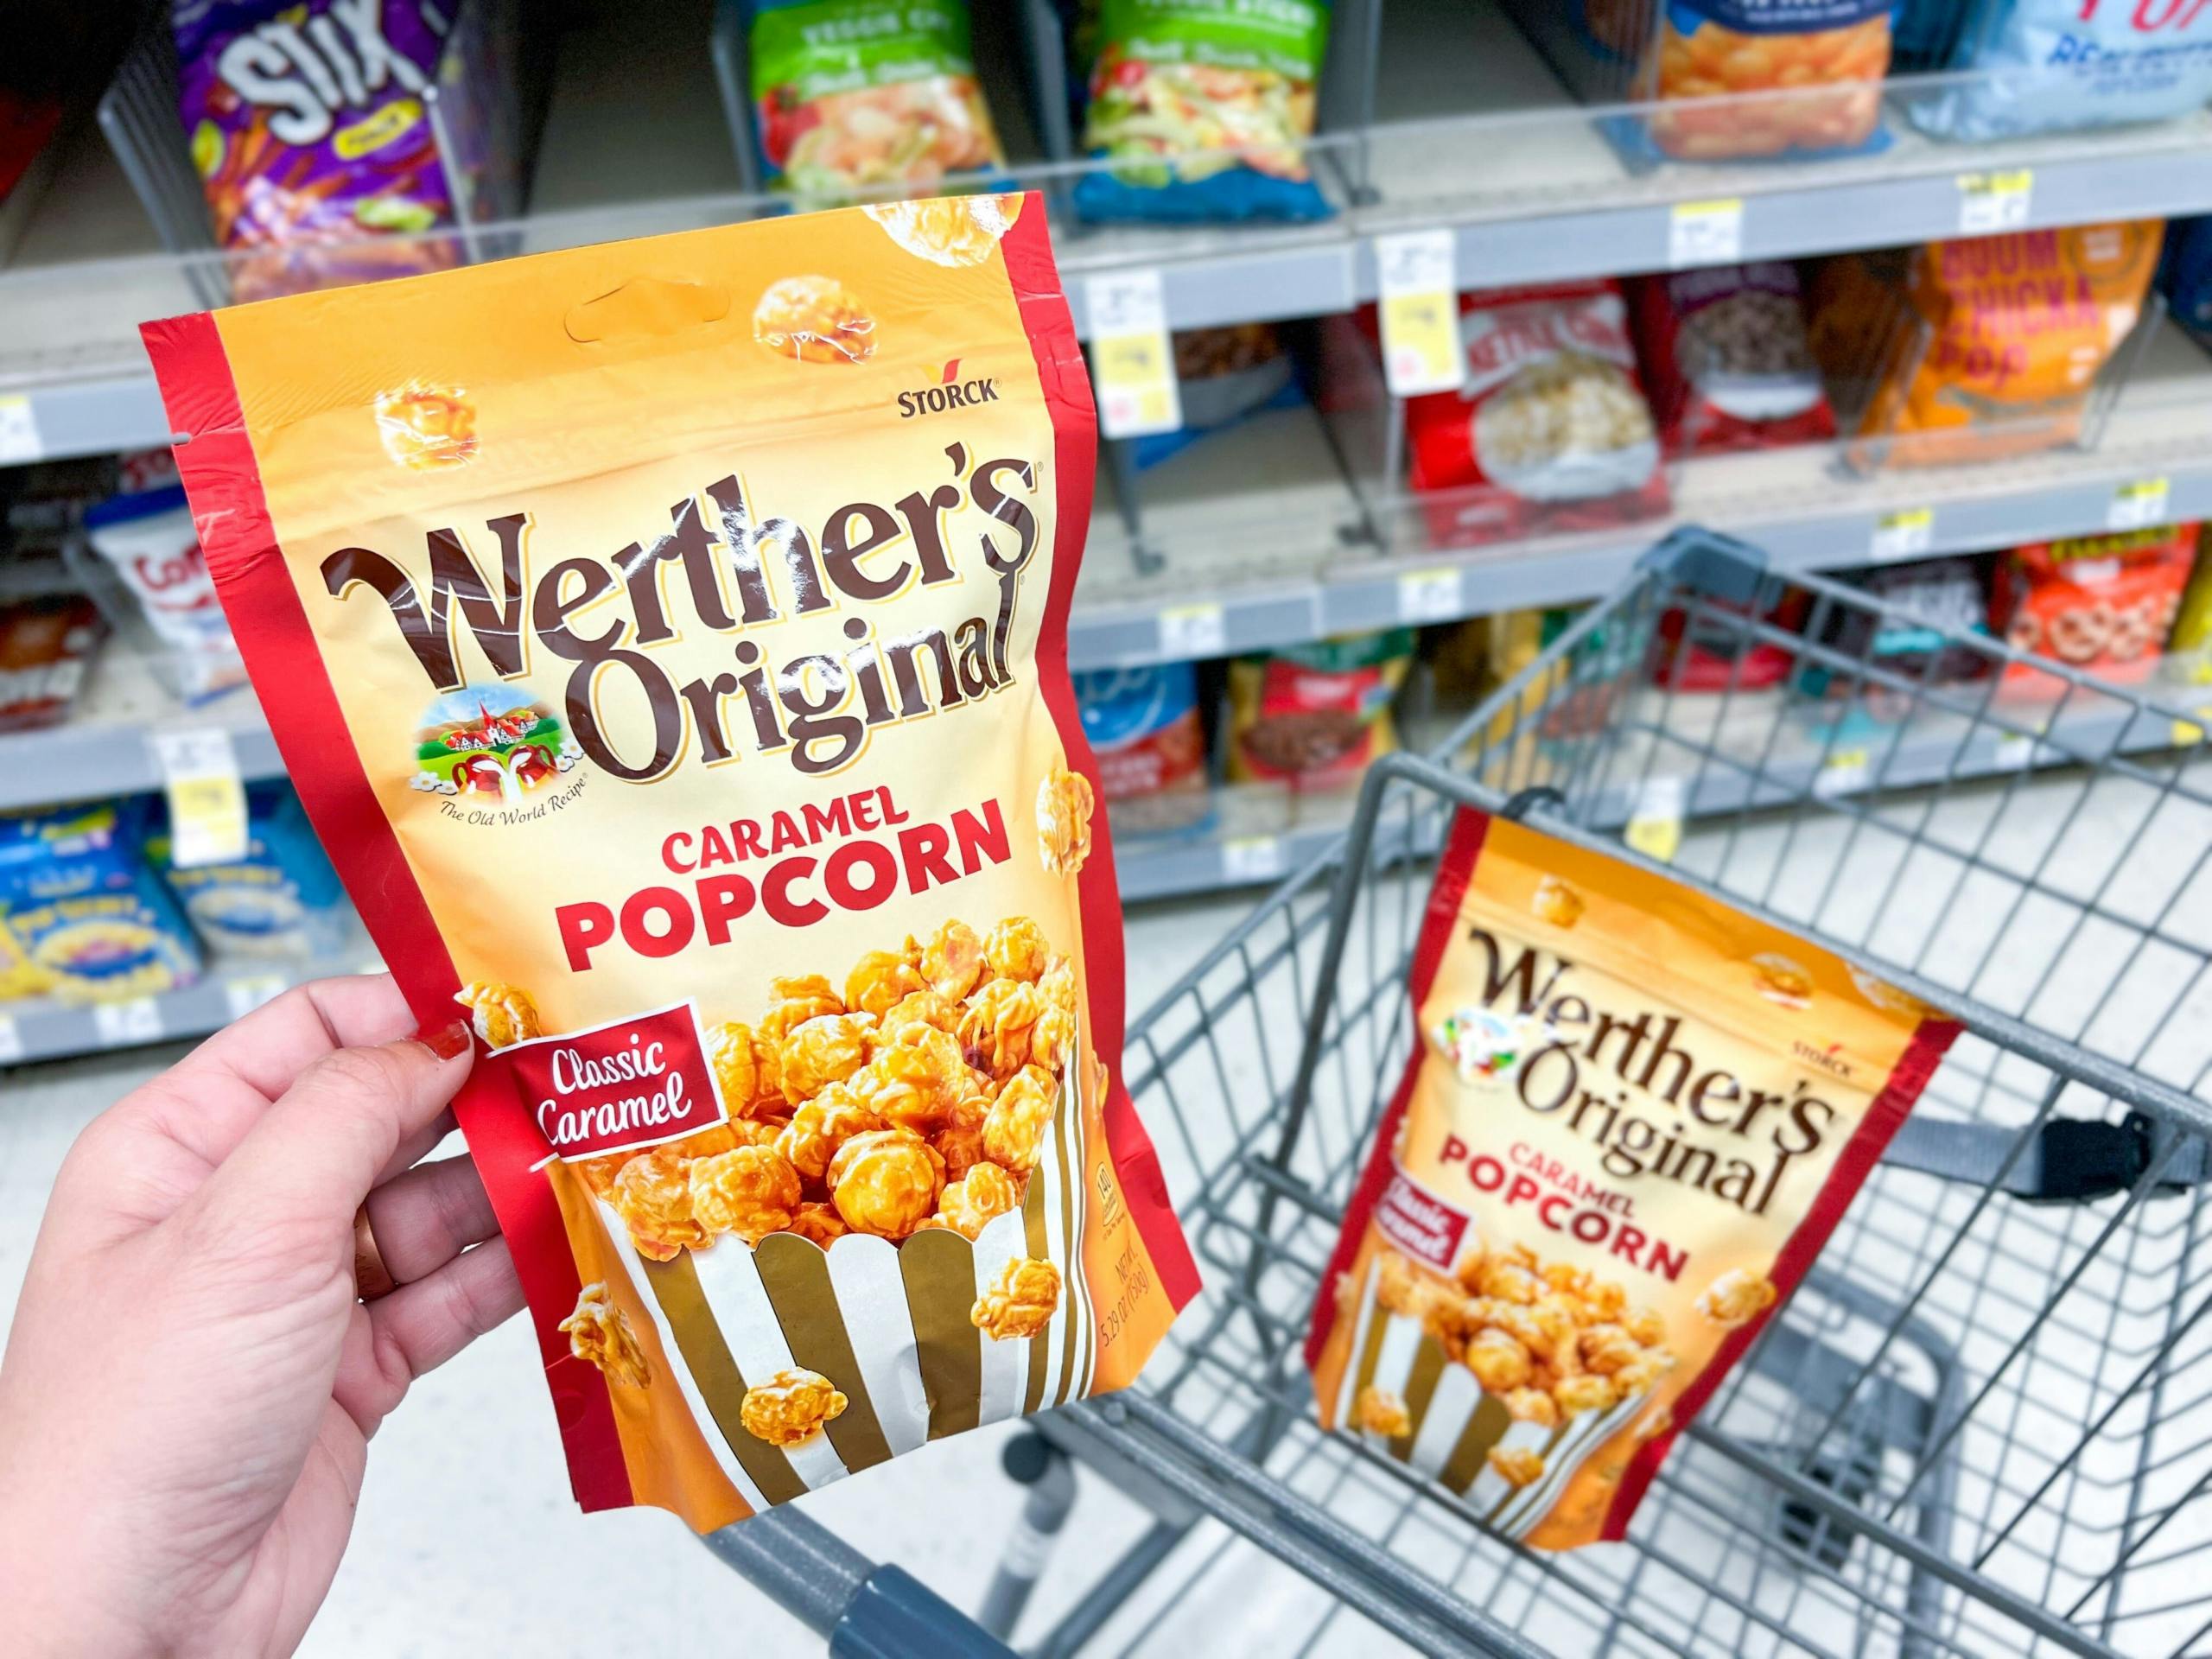 hand holding bag of werthers popcorn with another bag of popcorn in shopping cart